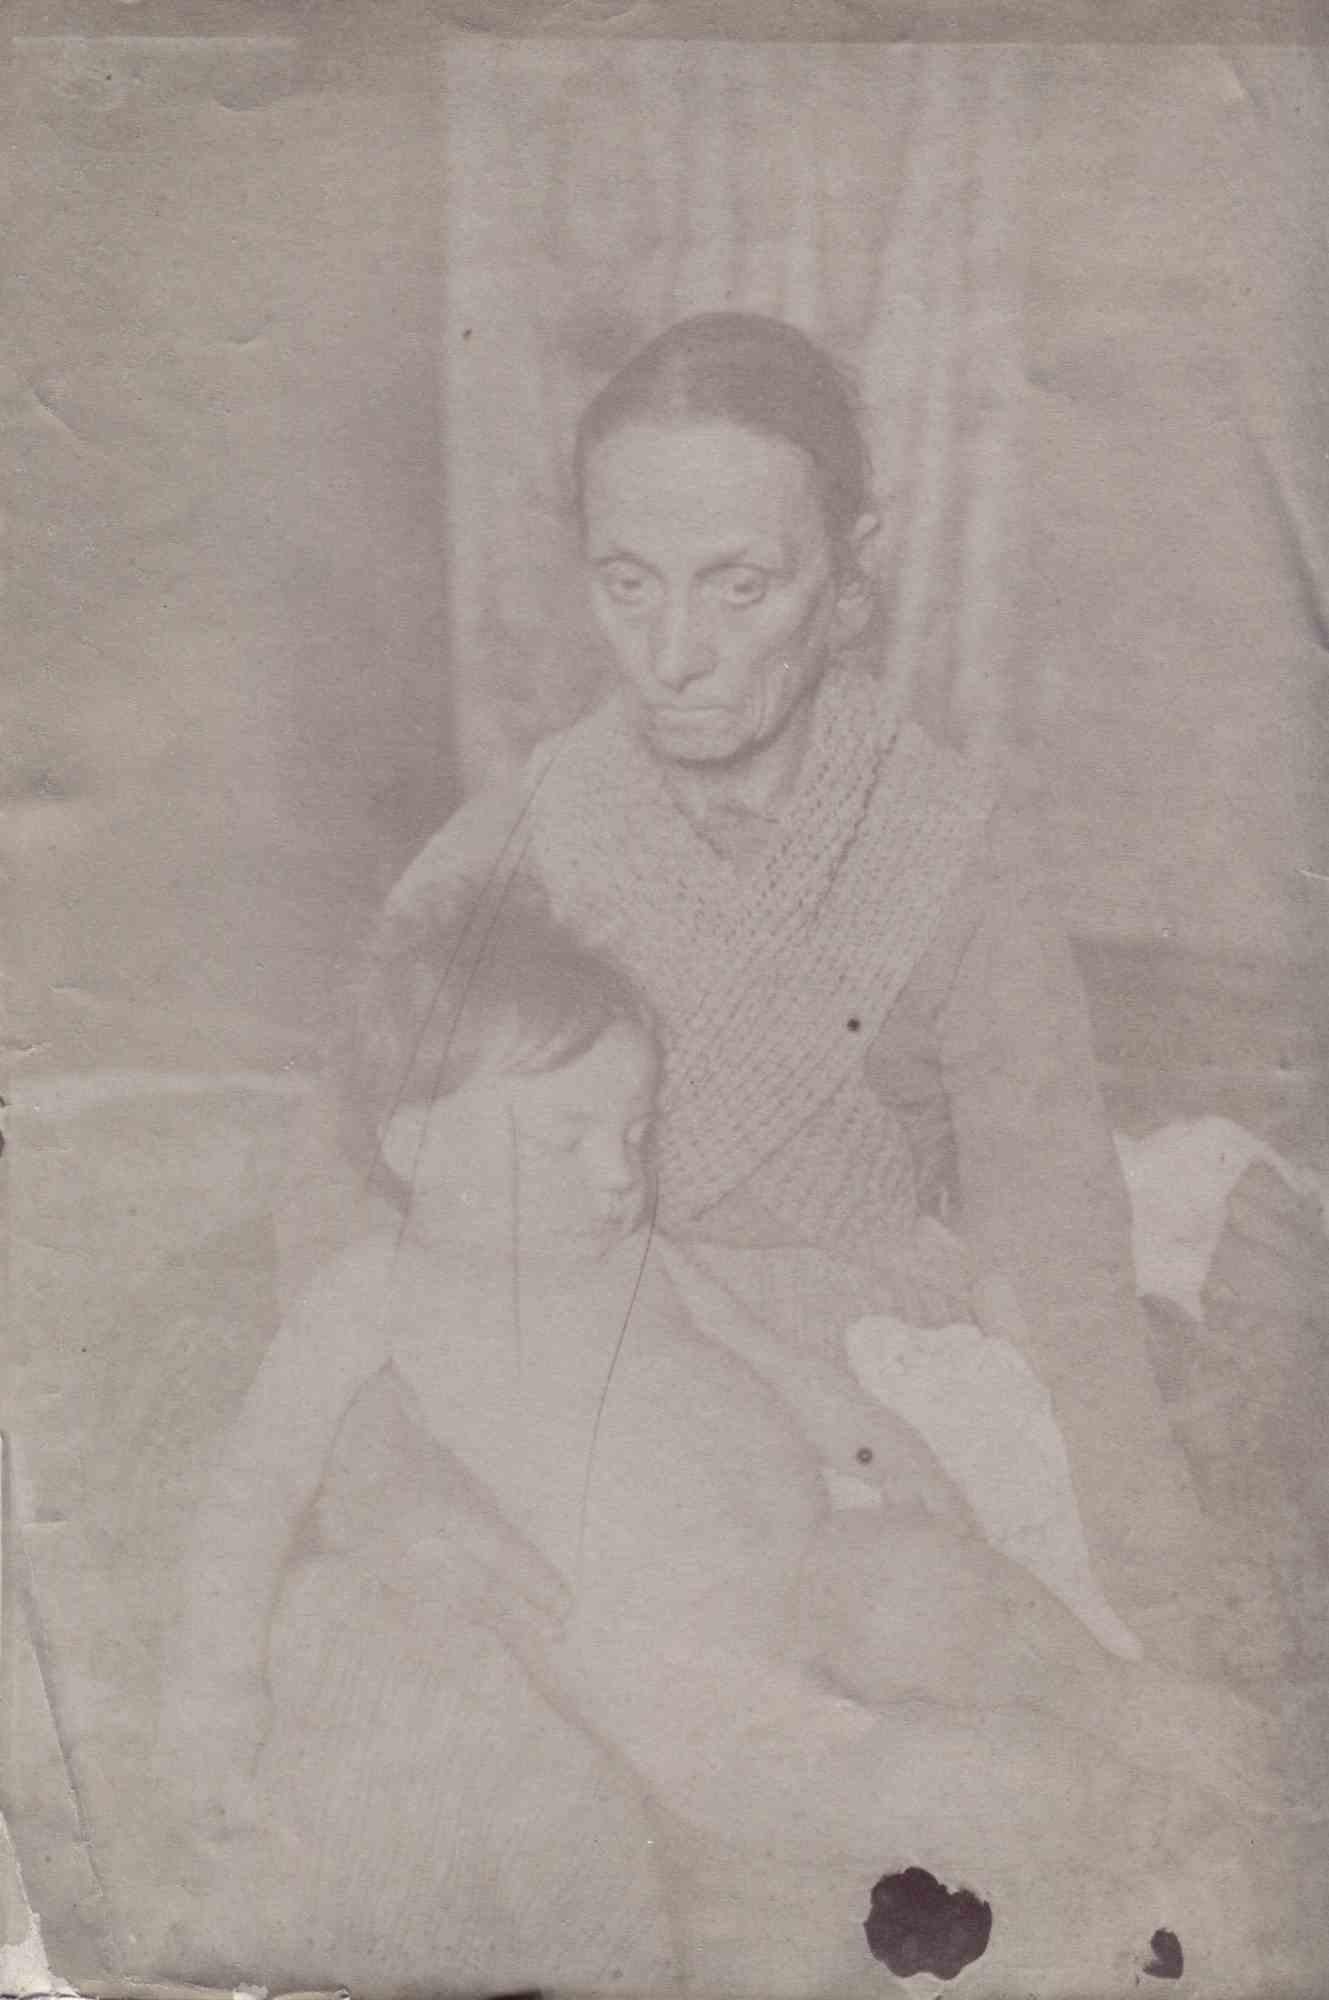 Unknown Figurative Photograph - Old days Photo - Mother and Child - Vintage Photo - Early 20th Century